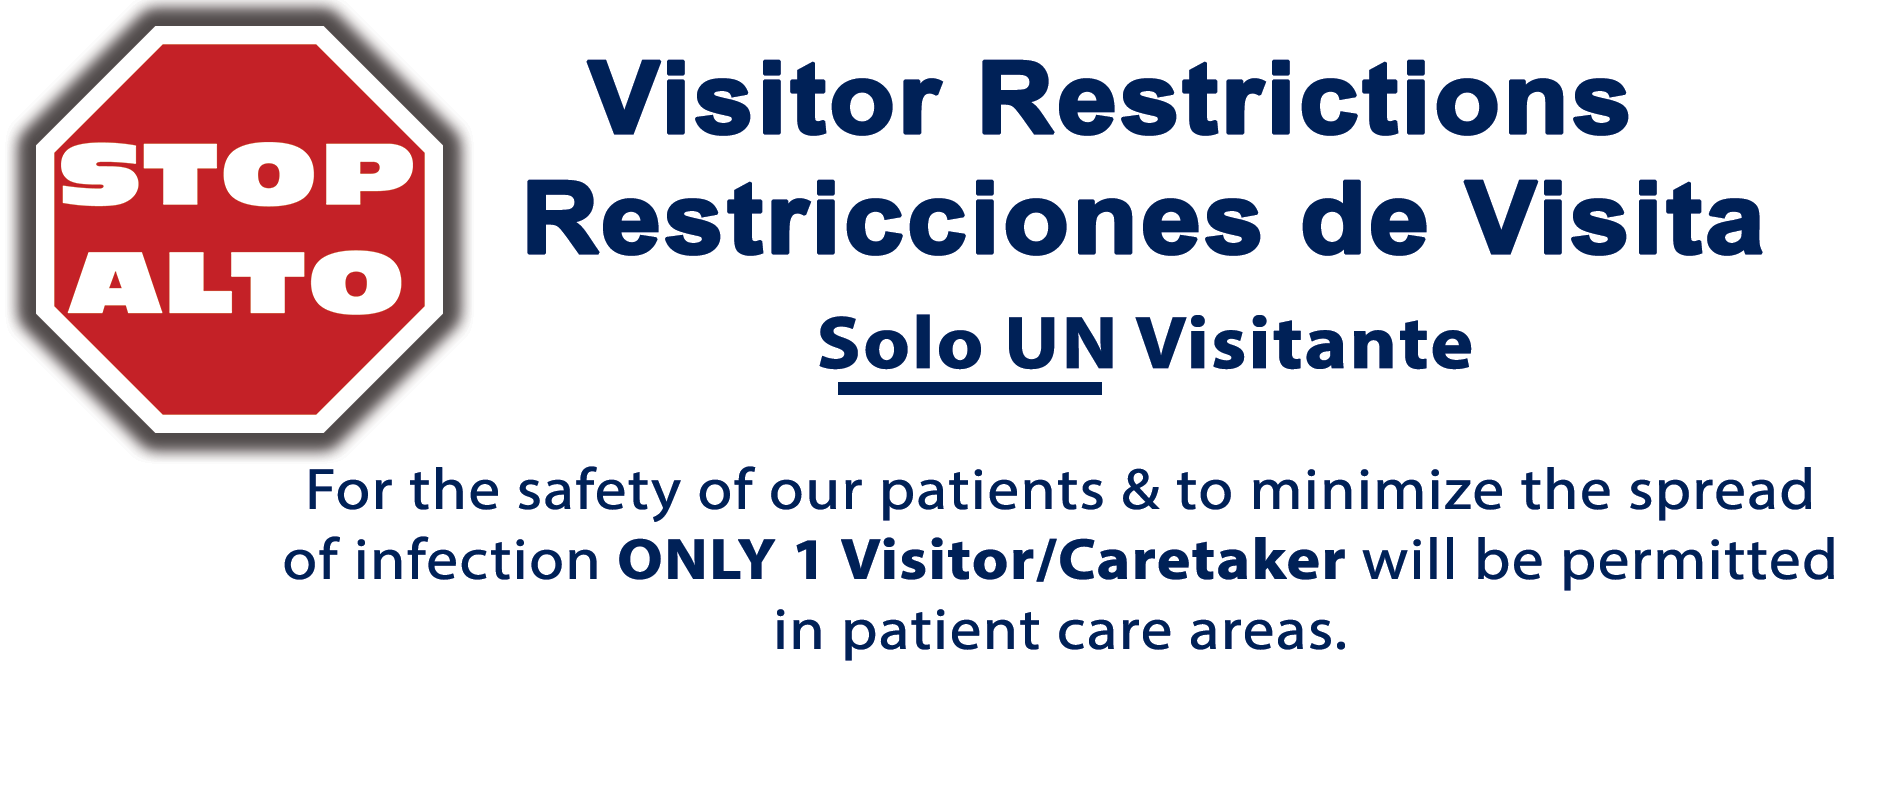 Visitor Restrictions